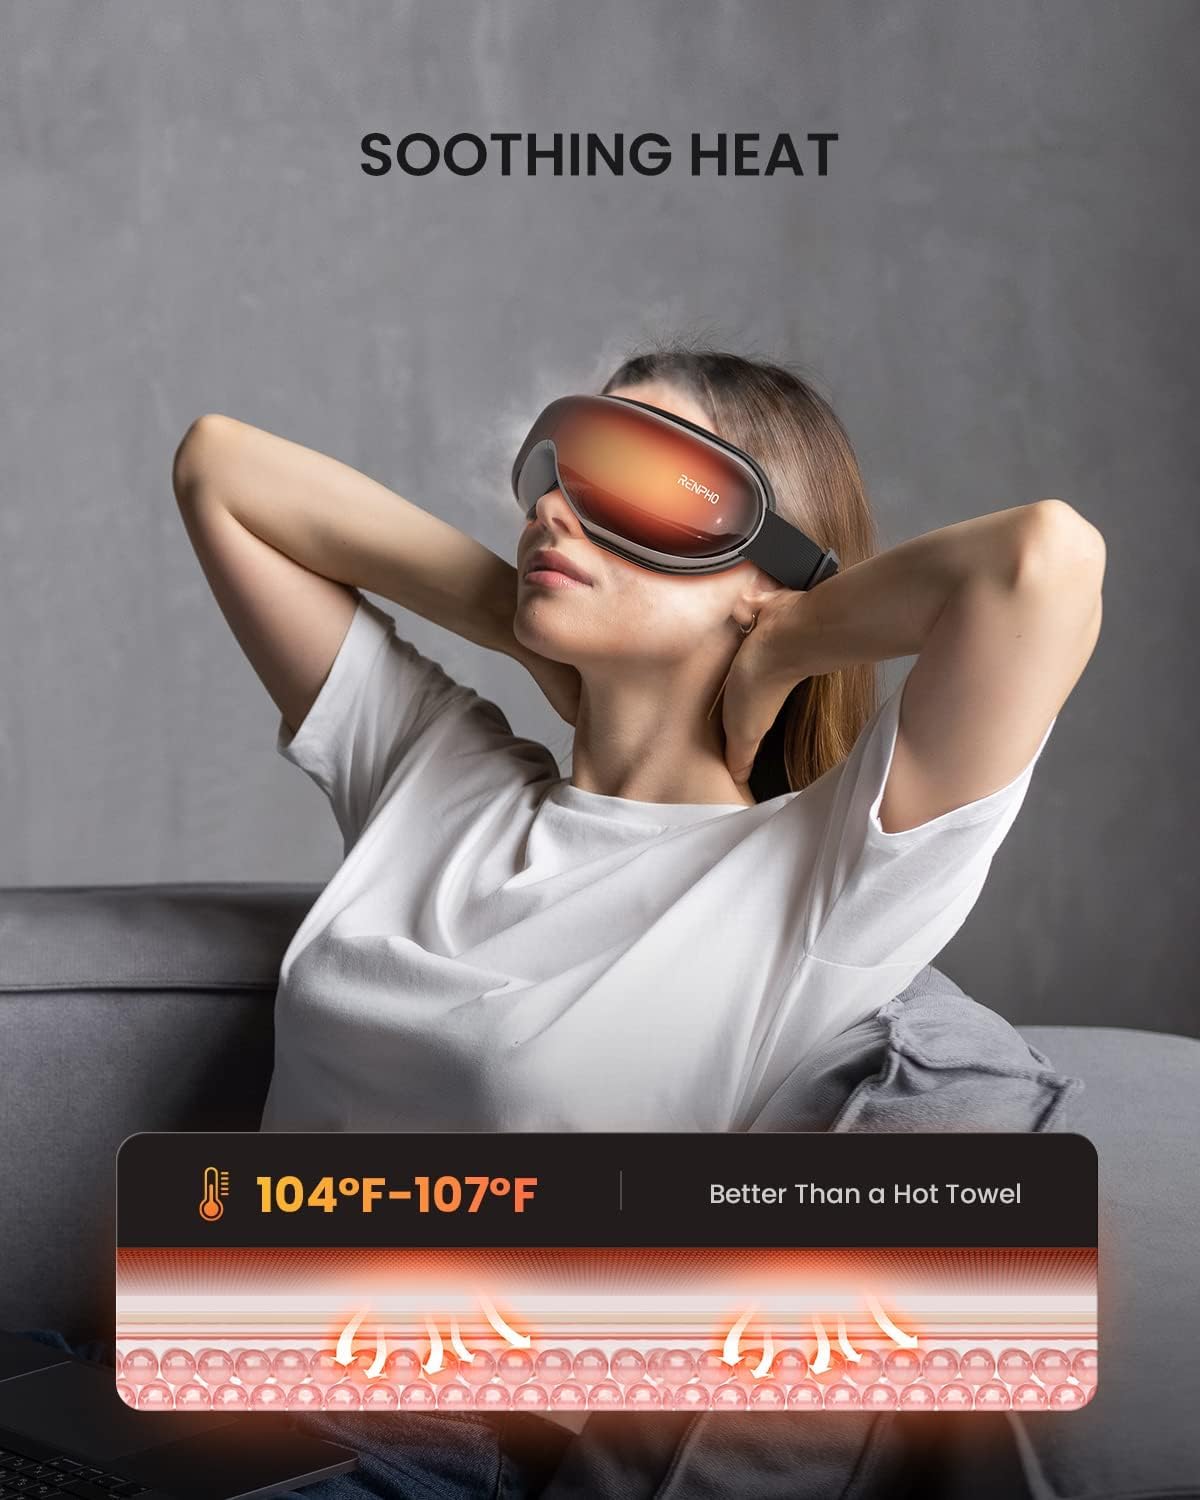 A woman relaxes in a white t-shirt, using a Renpho Eyeris 1 Eye Massager. She leans back comfortably with her hands behind her neck. Below her, an infographic highlights the mask's temperature range.